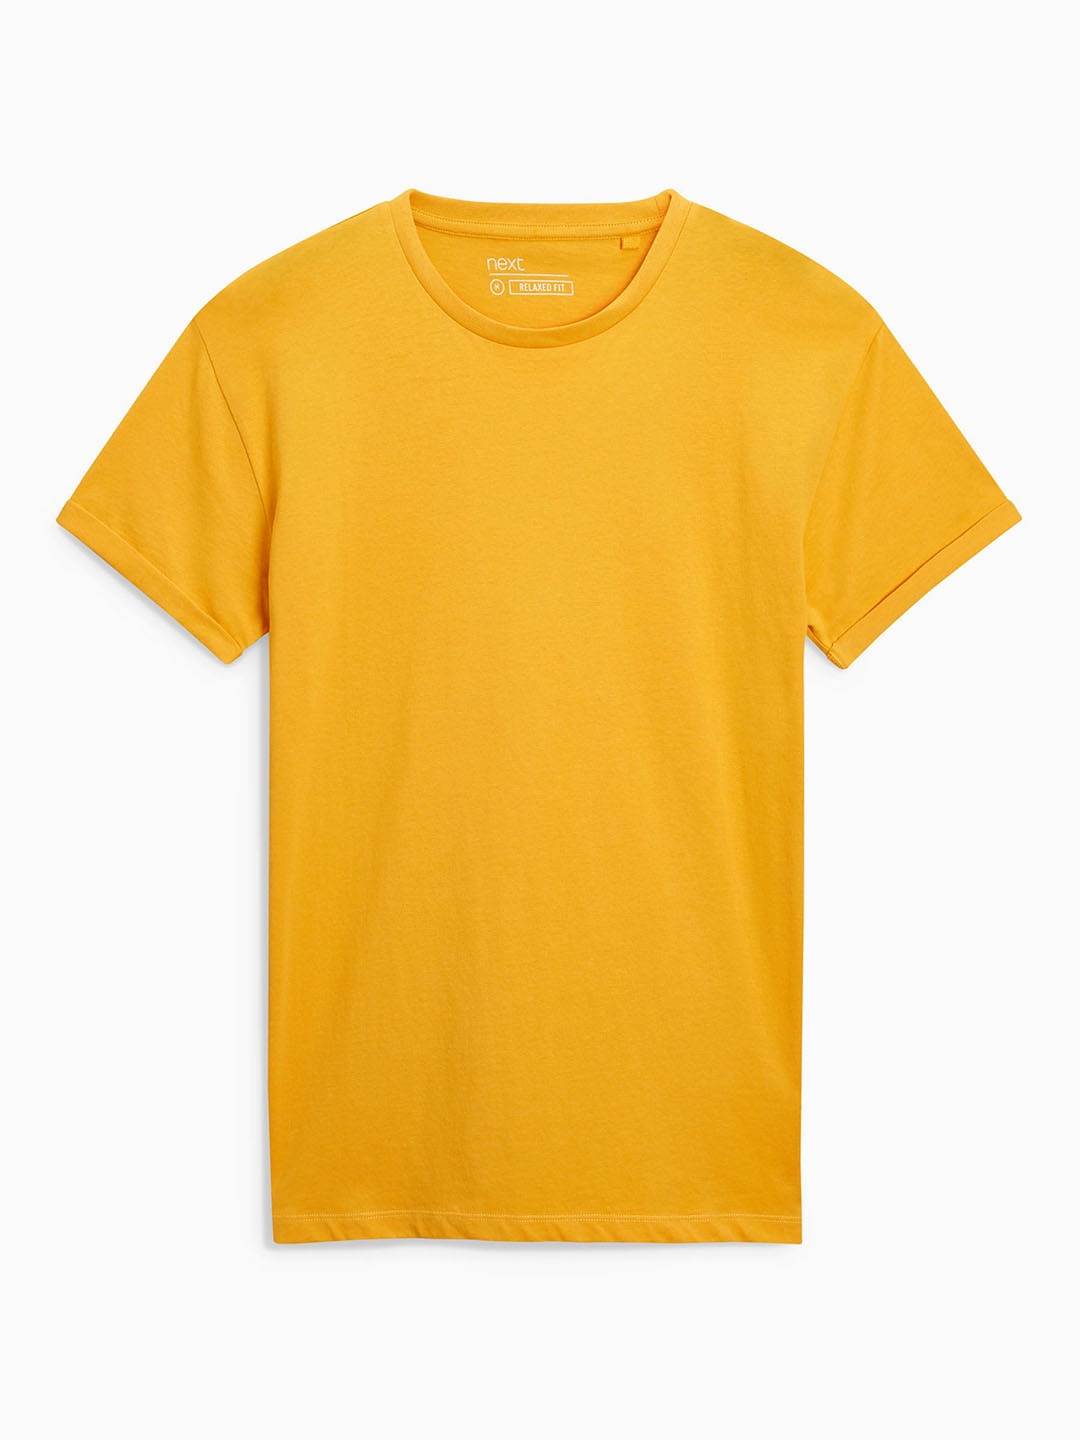 Buy Next Men Yellow Solid Round Neck T Shirt - Tshirts for Men 2503989 | Myntra